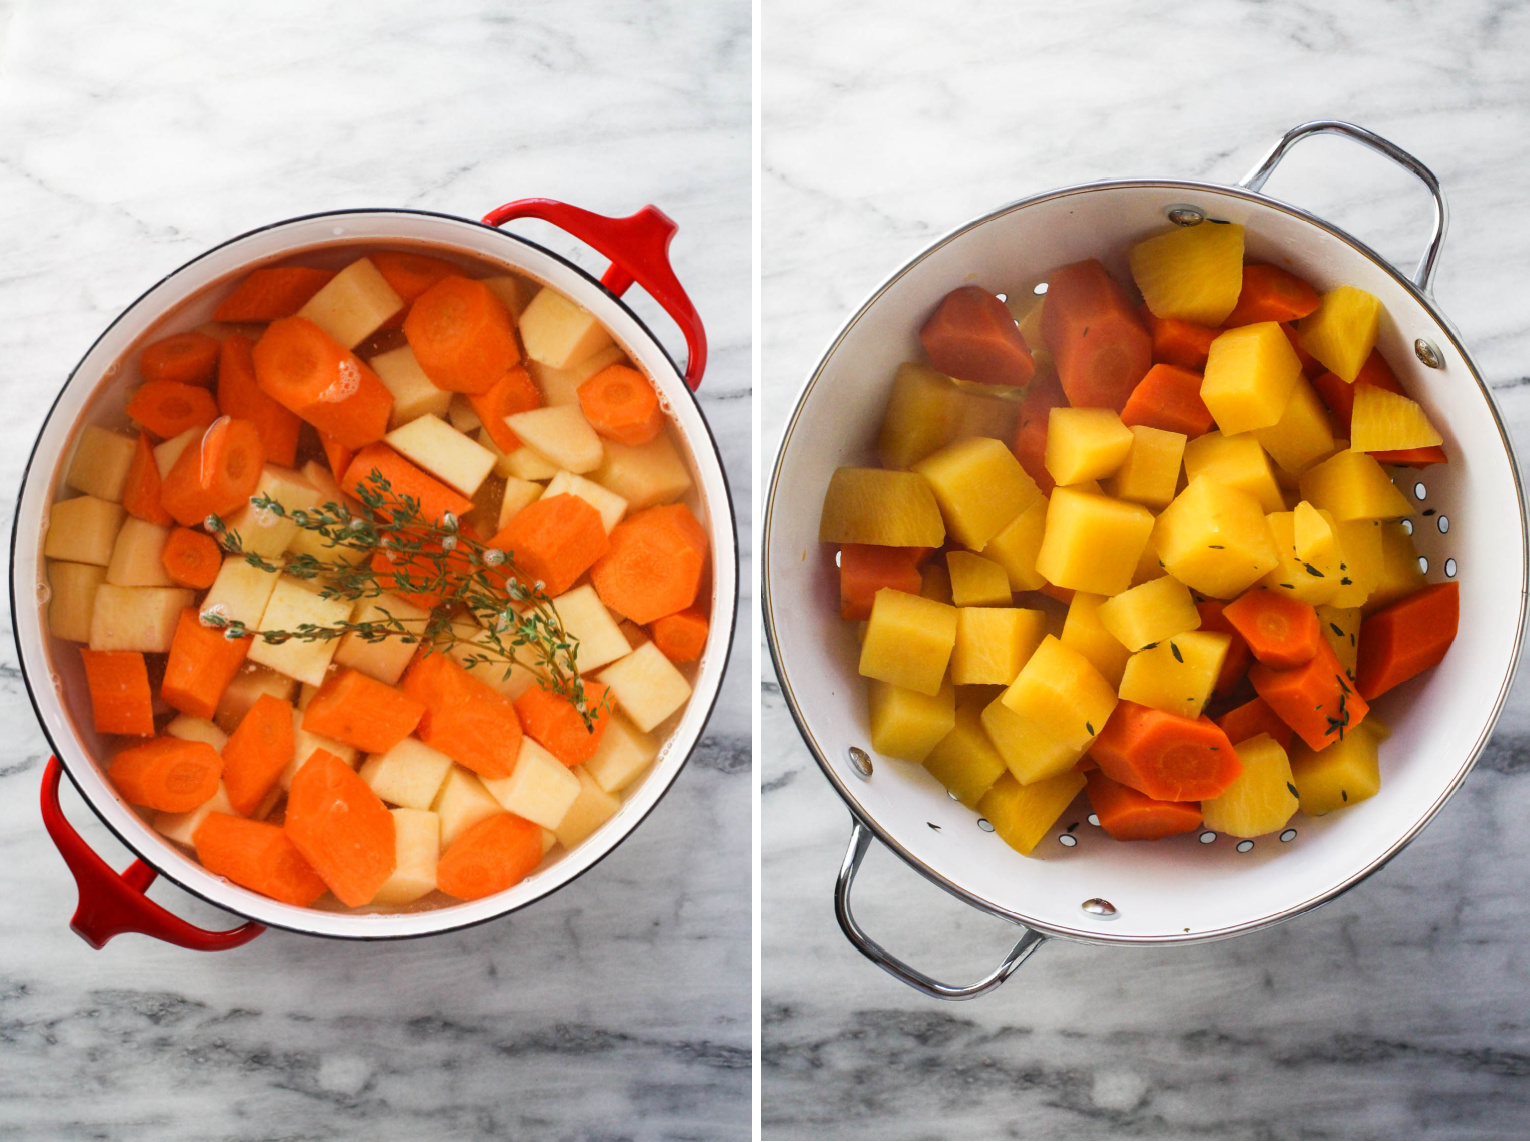 Two images side-by-side. On the left image, swede, carrots and thyme in a pot. On the right image, cooked swede and carrots in a collander.